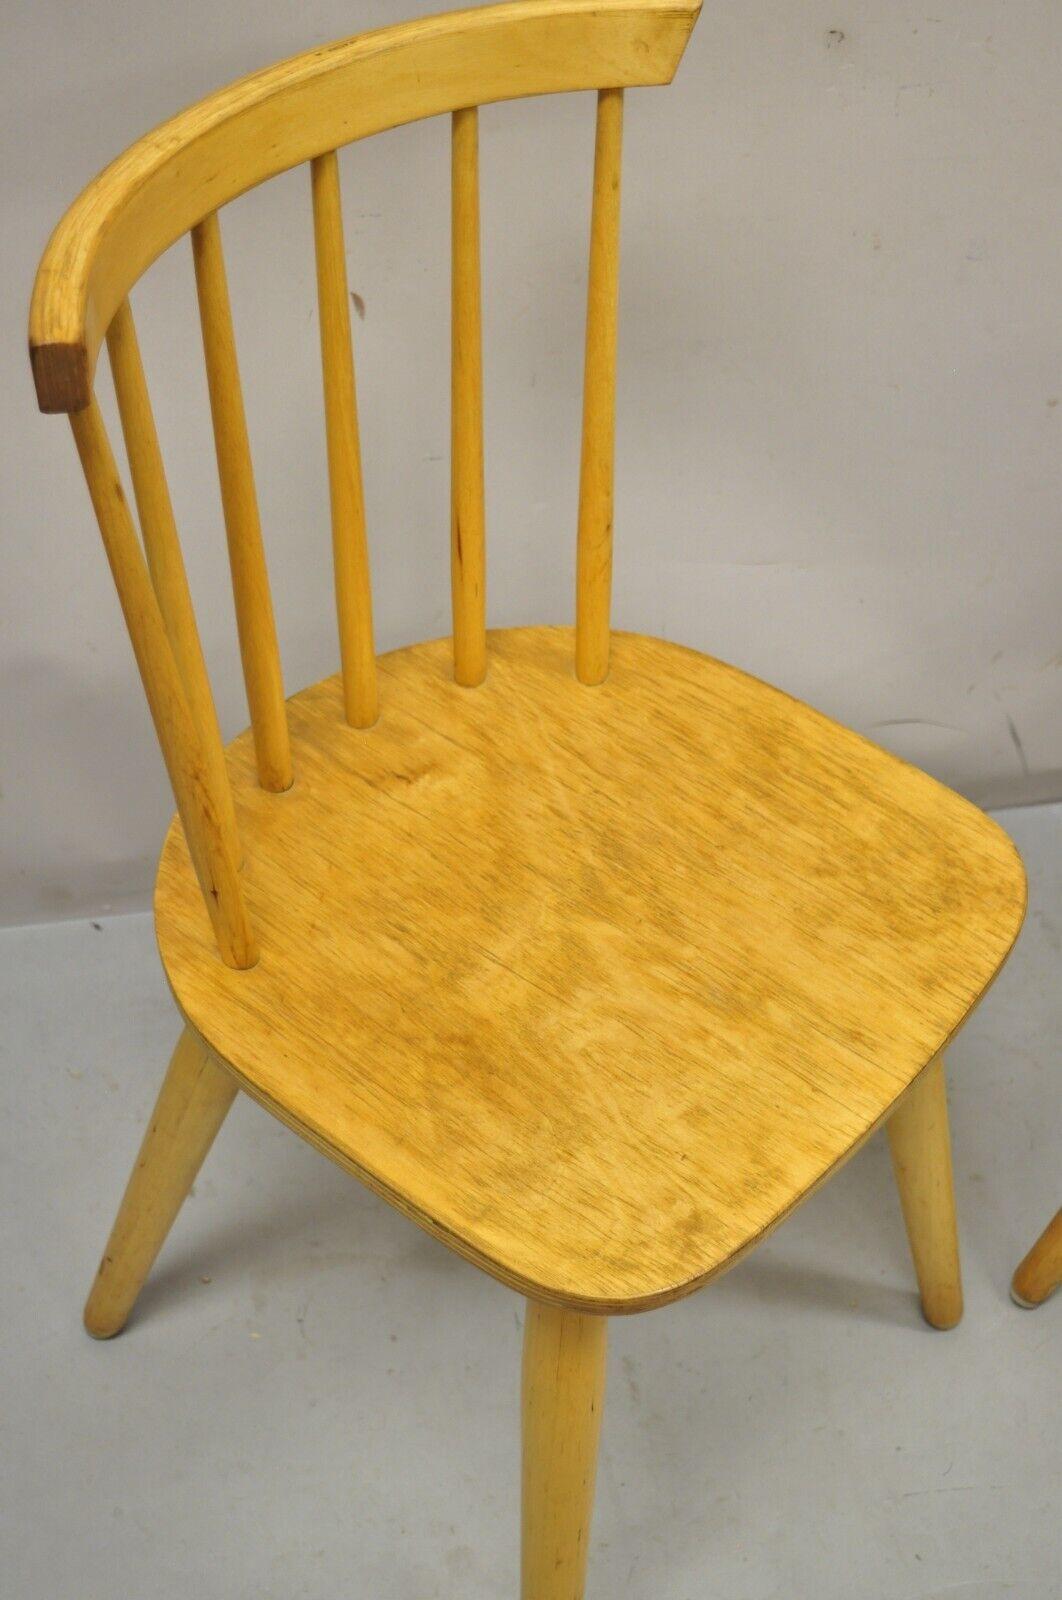 Vintage Mid-Century Modern Spindle Bush Birch Maple Side Chairs, a Pair For Sale 3